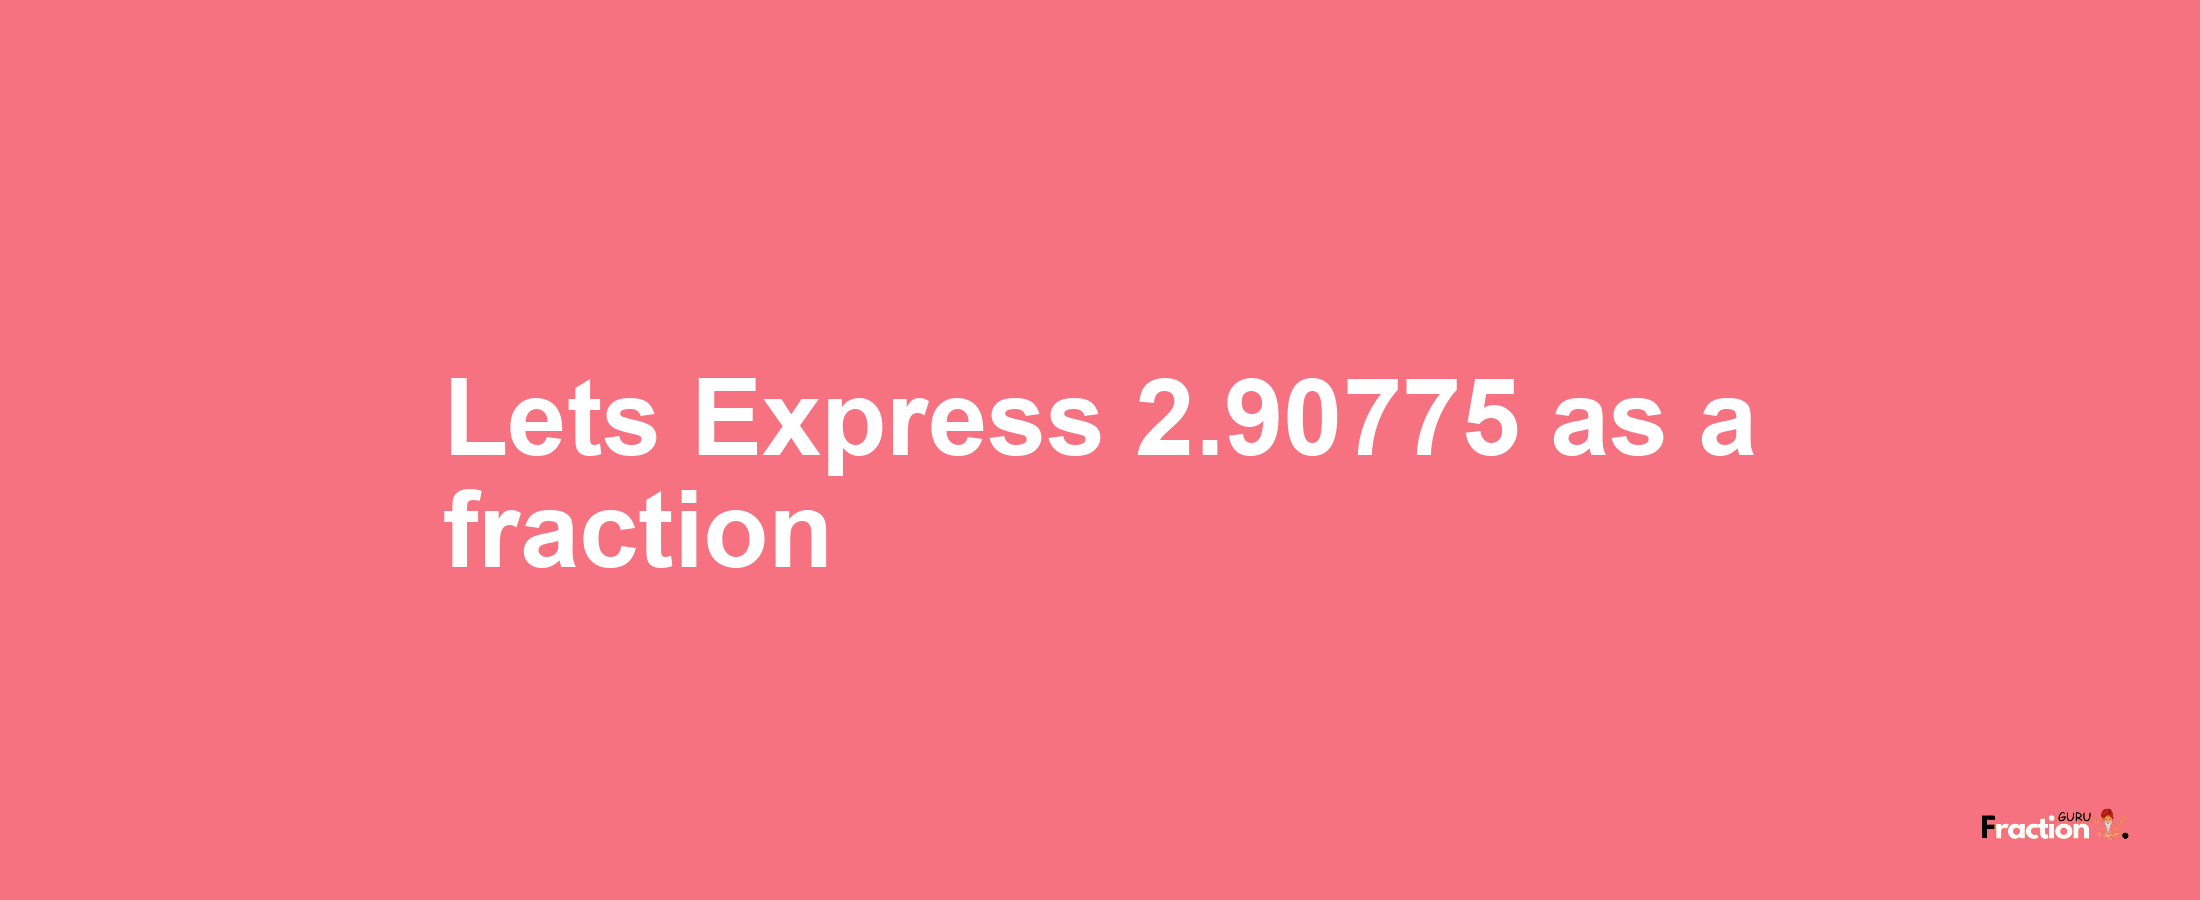 Lets Express 2.90775 as afraction